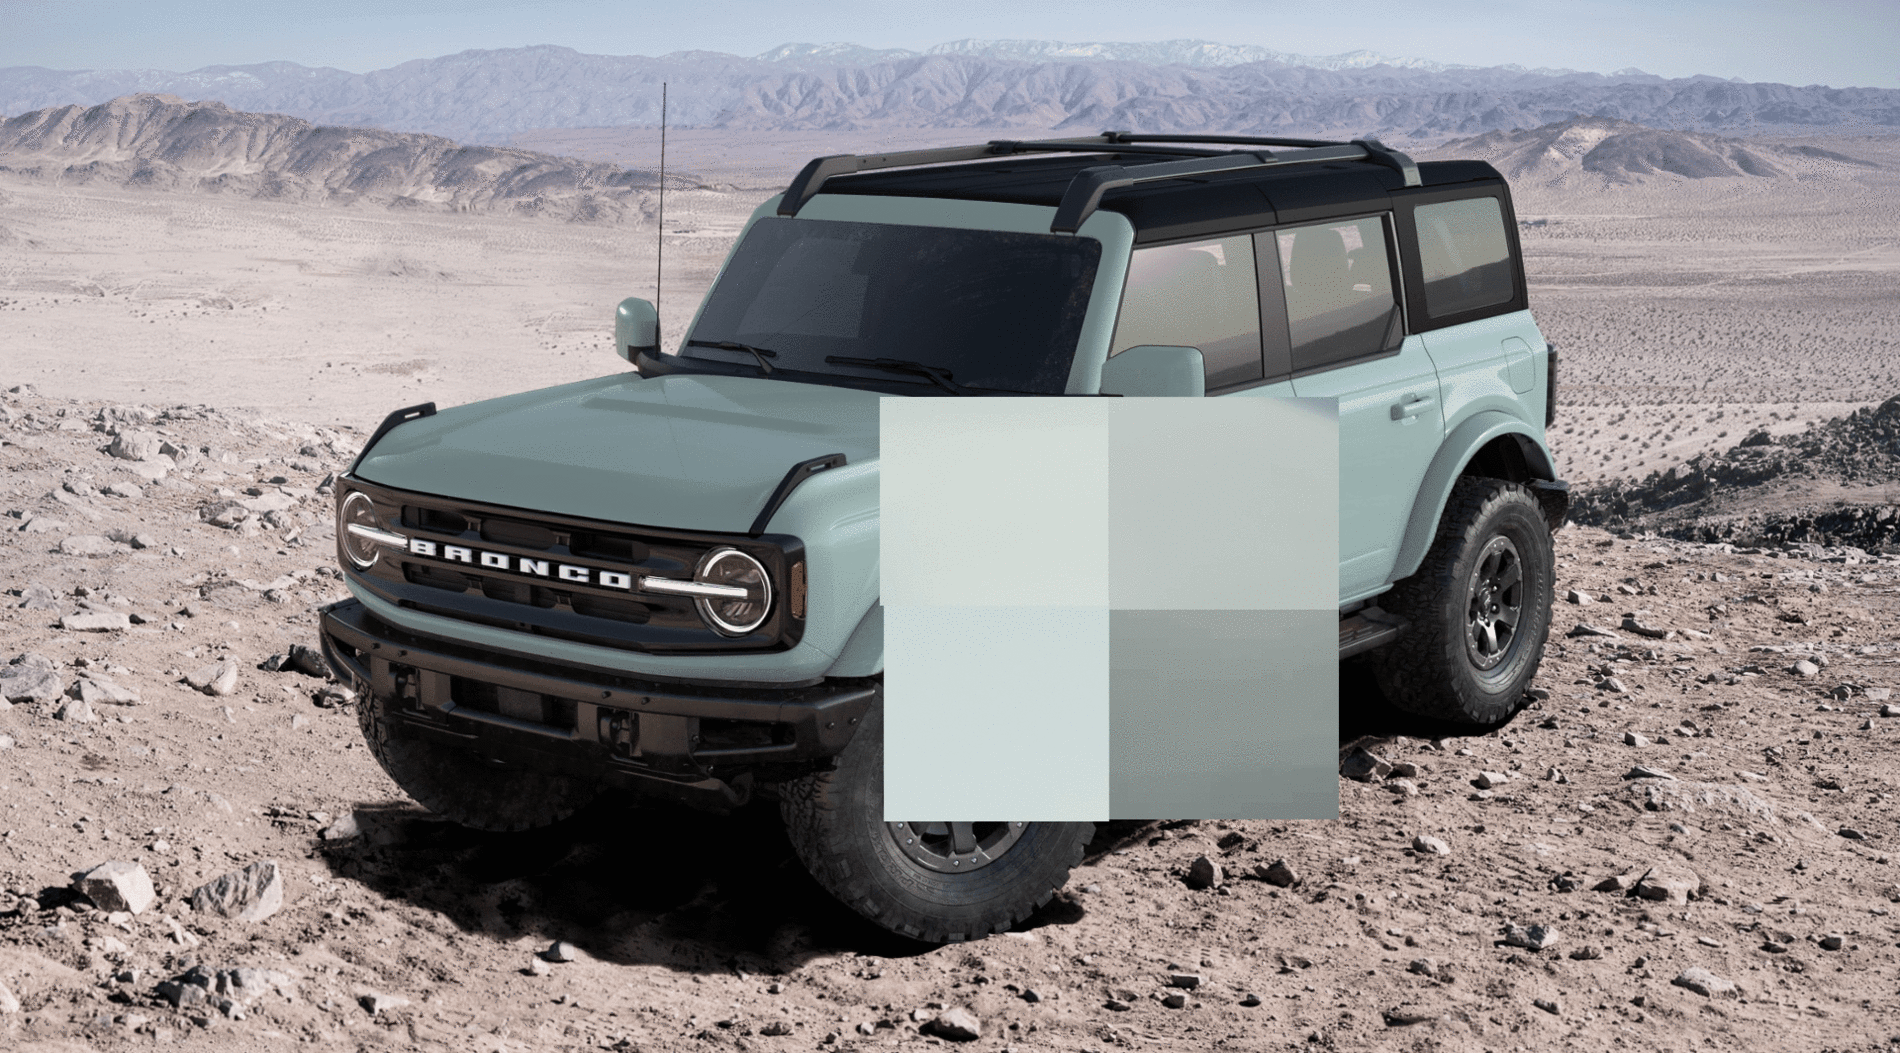 Ford Bronco Rendering: 2022 Boxwood Green and Cactus Gray OBX with 33s + white tops + shadow black tops CG_HEROSWATCH